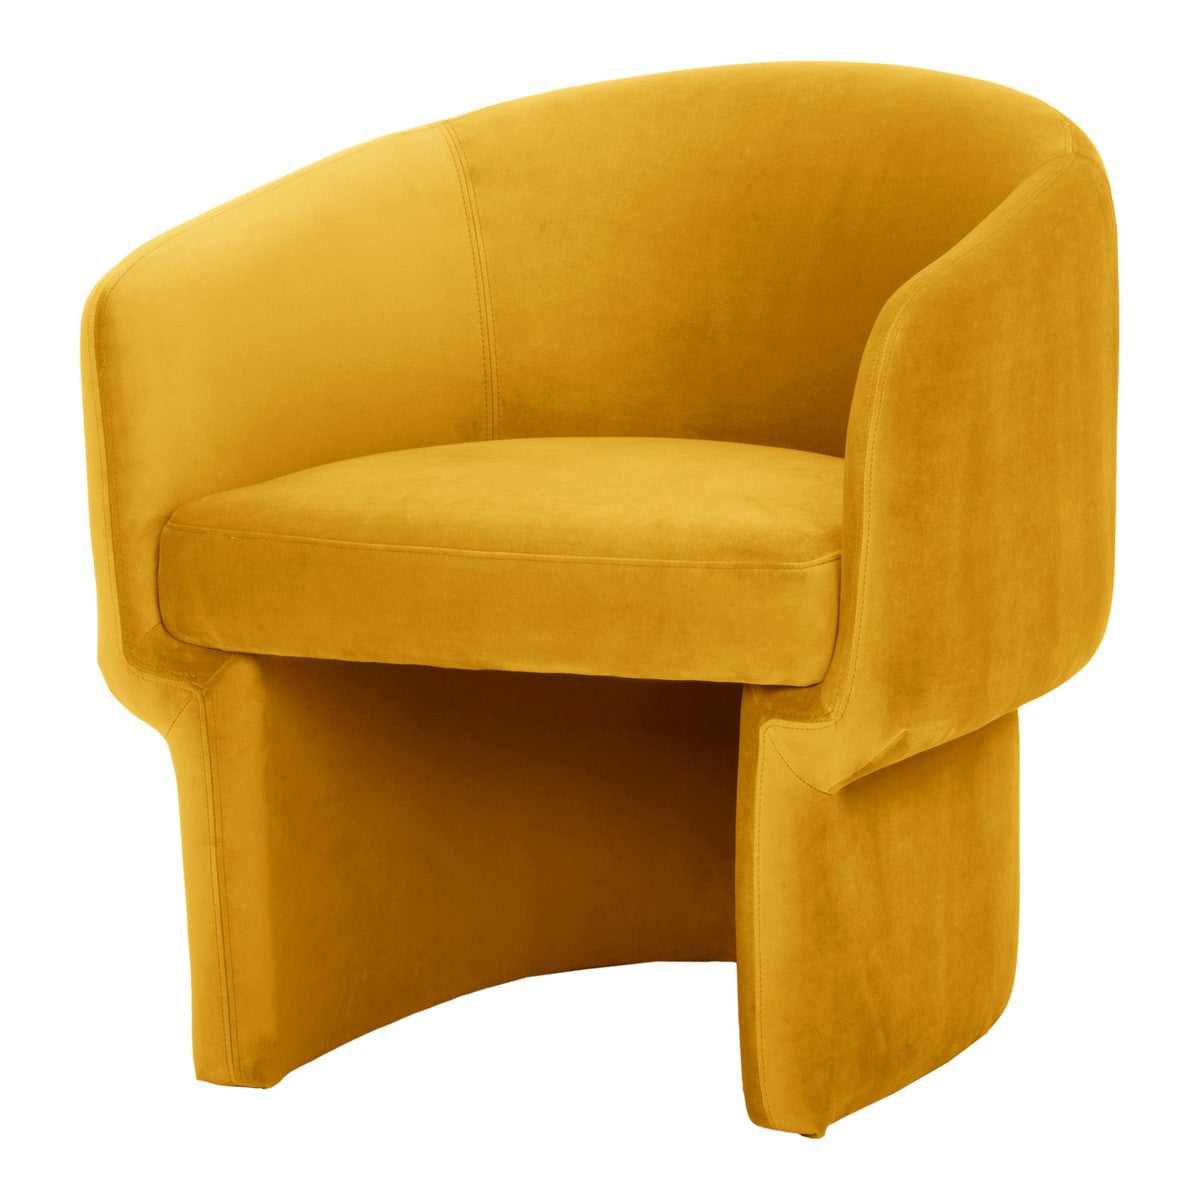 Moe's Home Collection Franco Chair Mustard - JM-1005-09